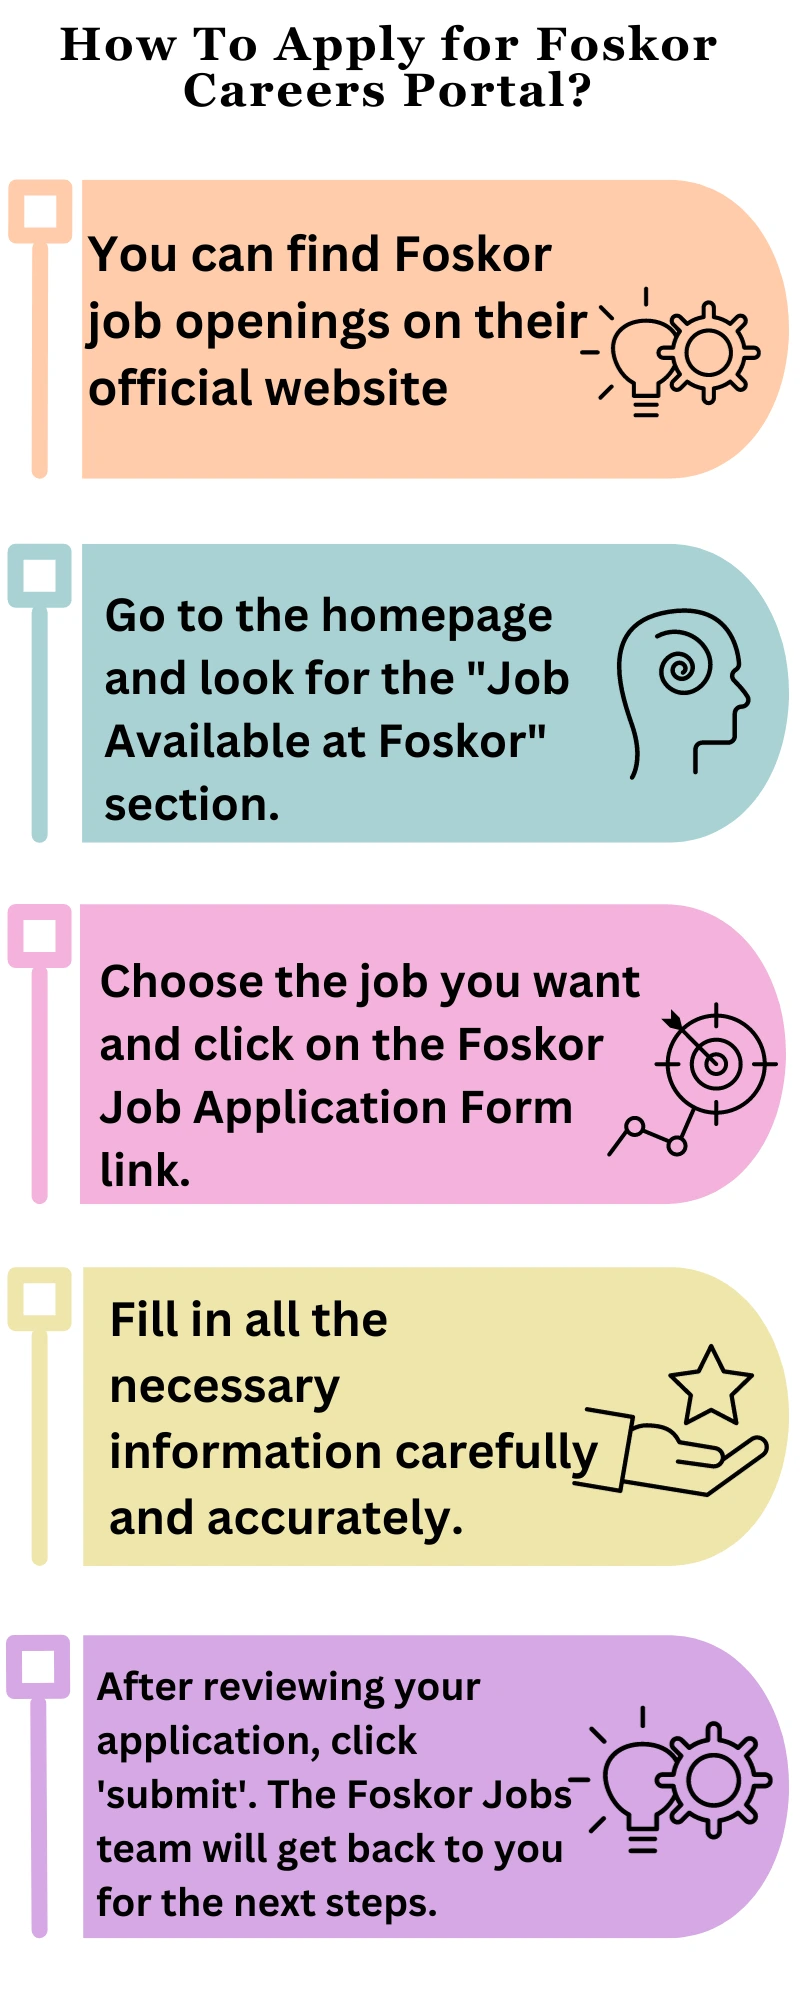 How To Apply for Foskor Careers Portal?